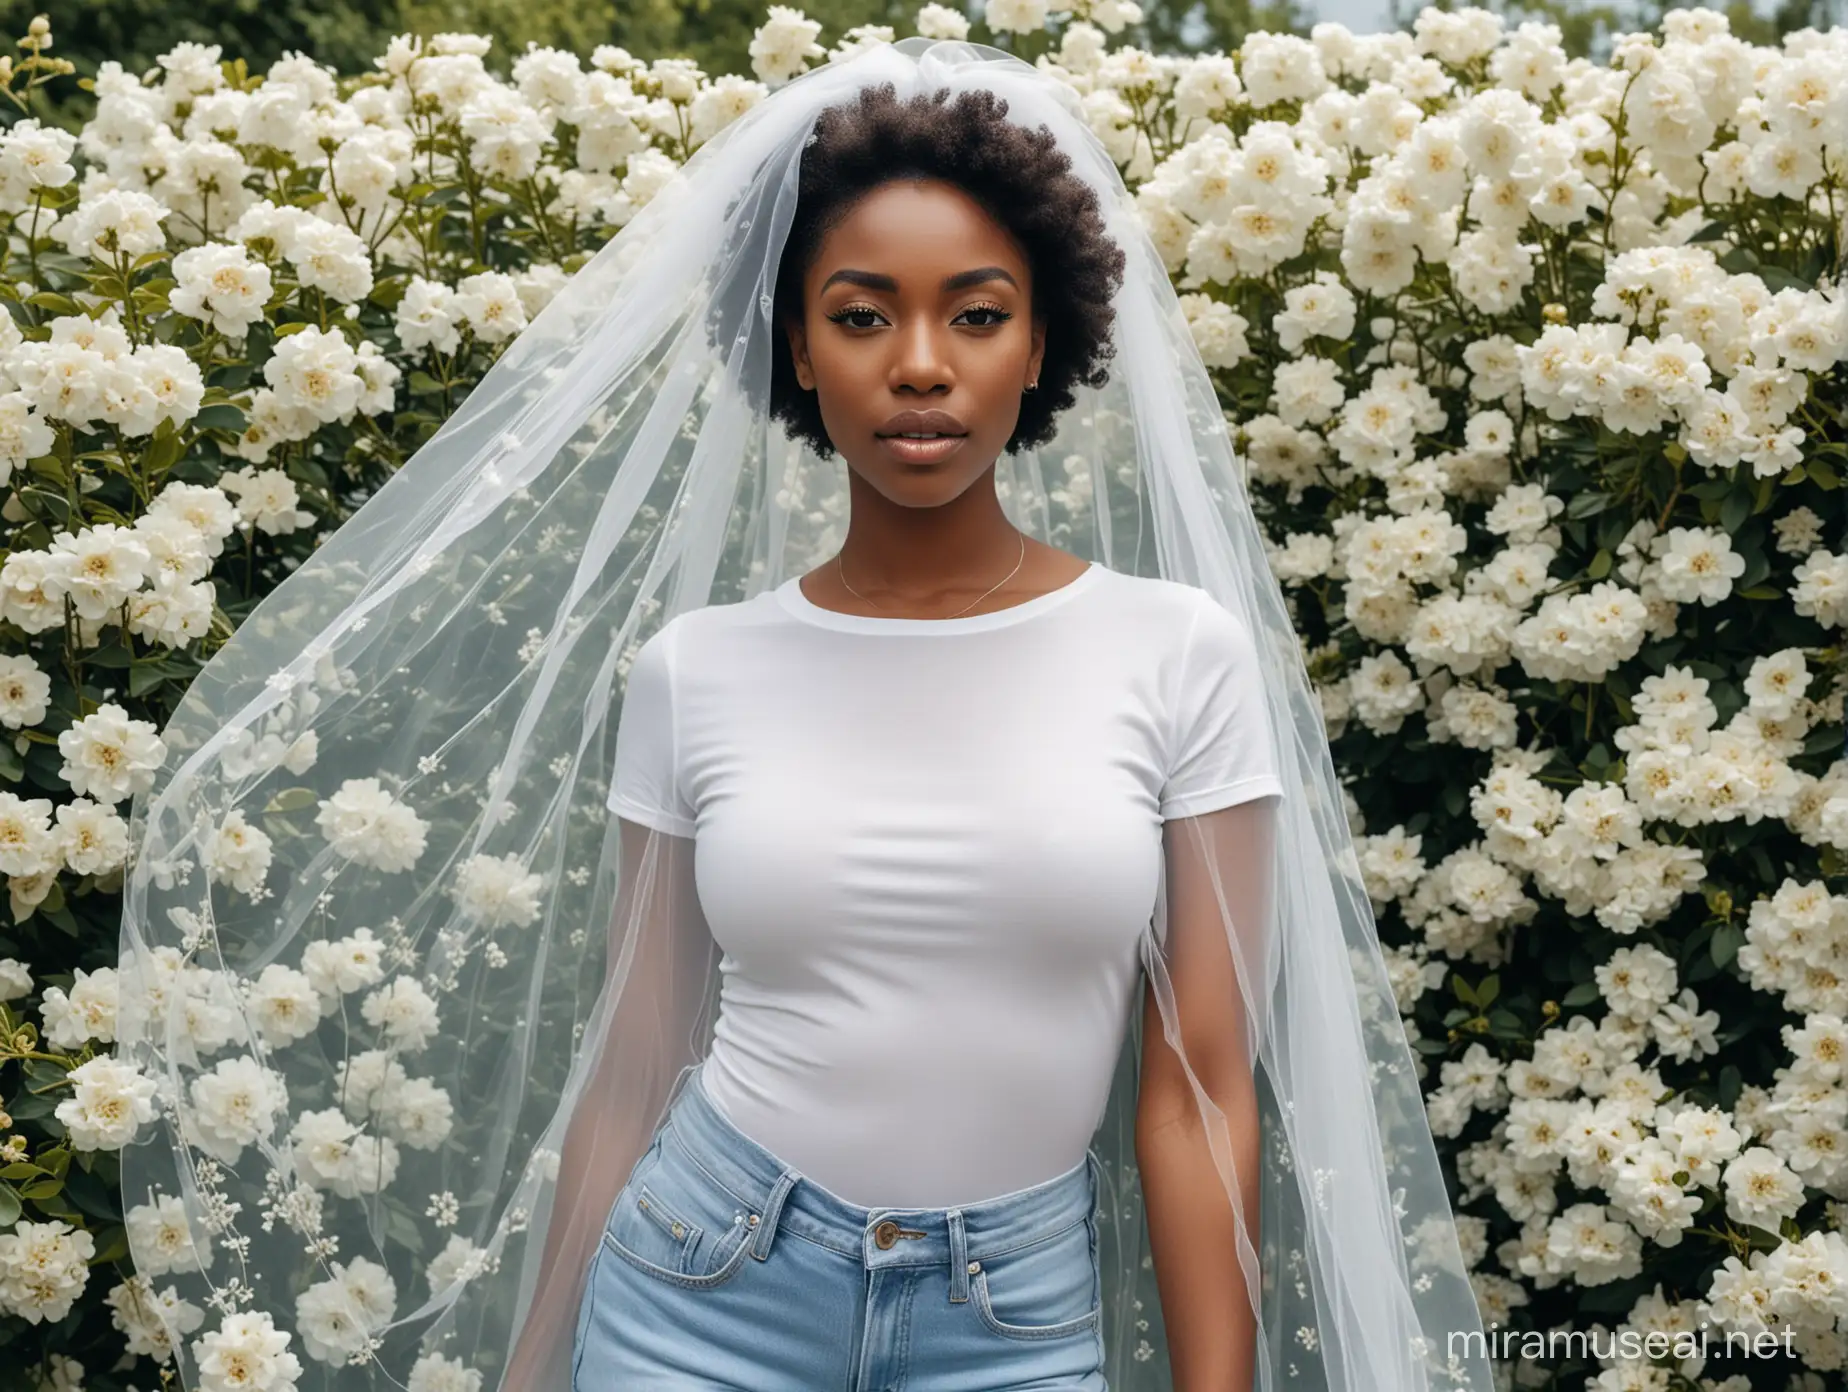 Create an image of a beautiful black women wearing a white tshirt and blue jeans. She is wearing a wedding veil. She is surrounded by white flowers